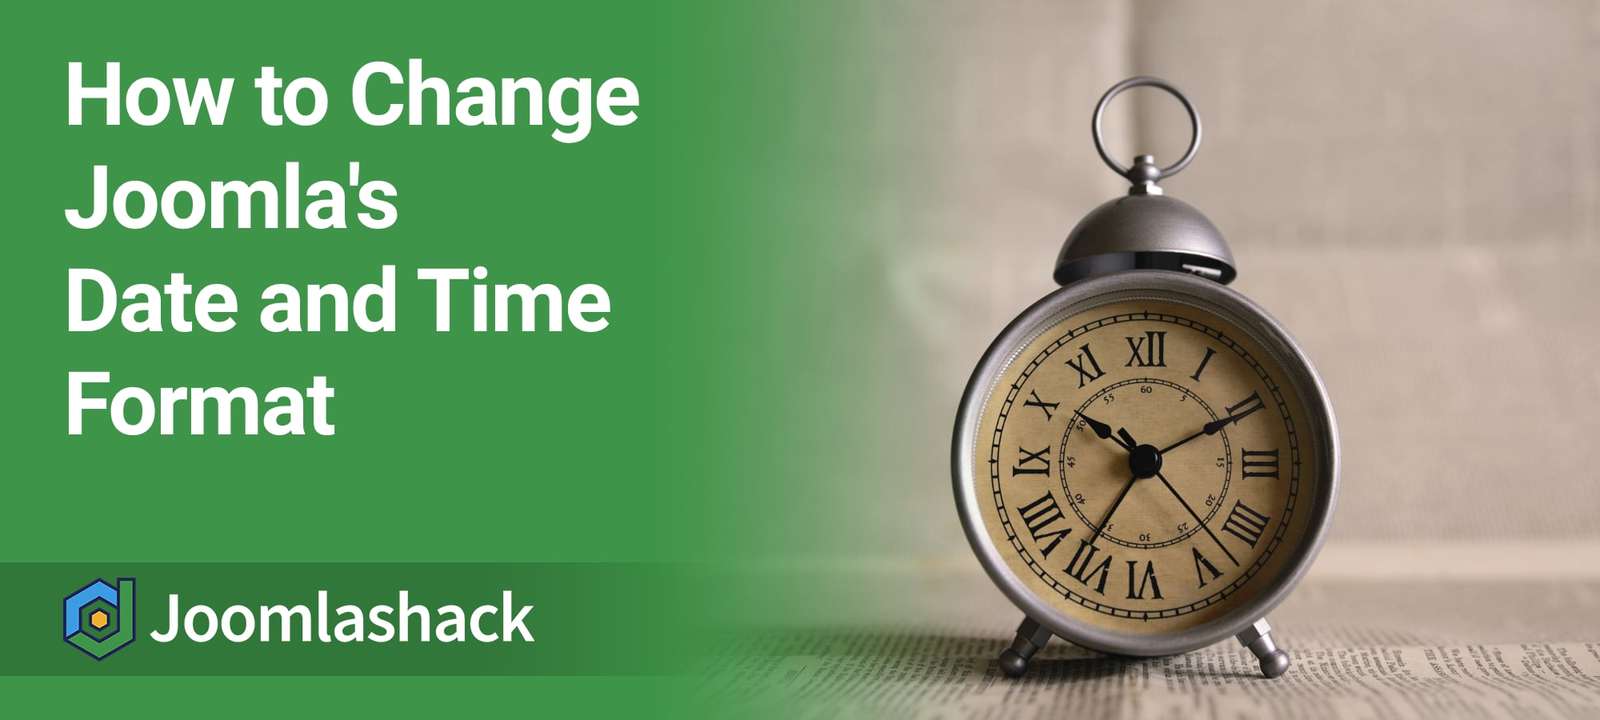 Change Joomla's Date and Time Format